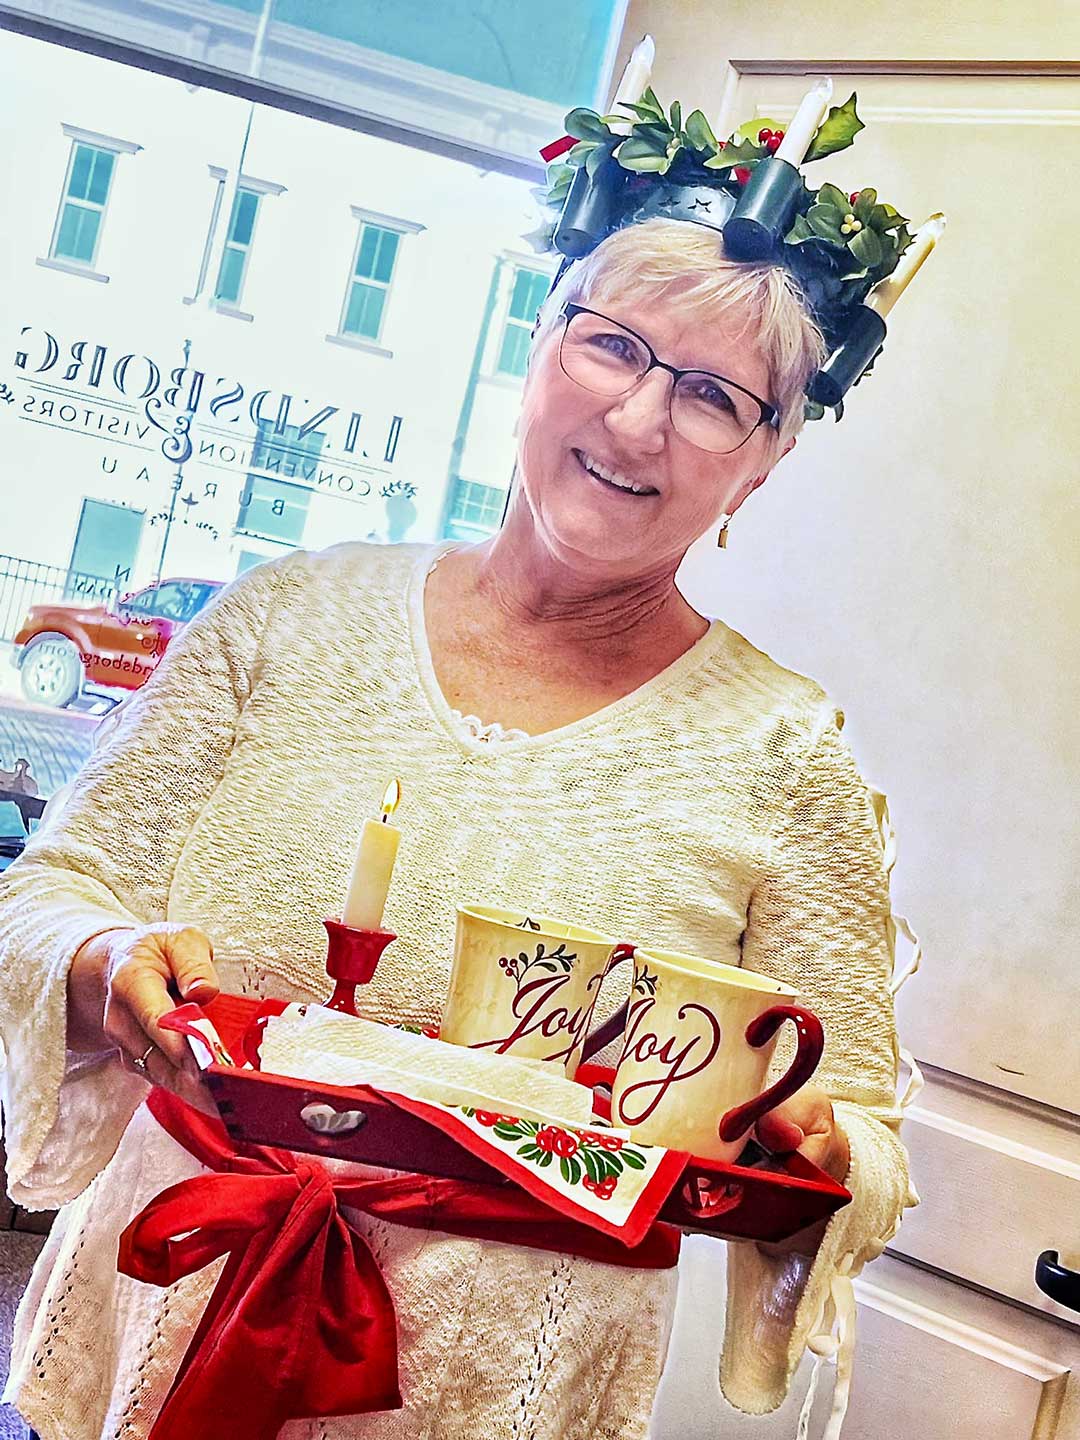 Image of Nana dressed as St. Lucia holding tray with Christmas mugs and a lit candle on it.